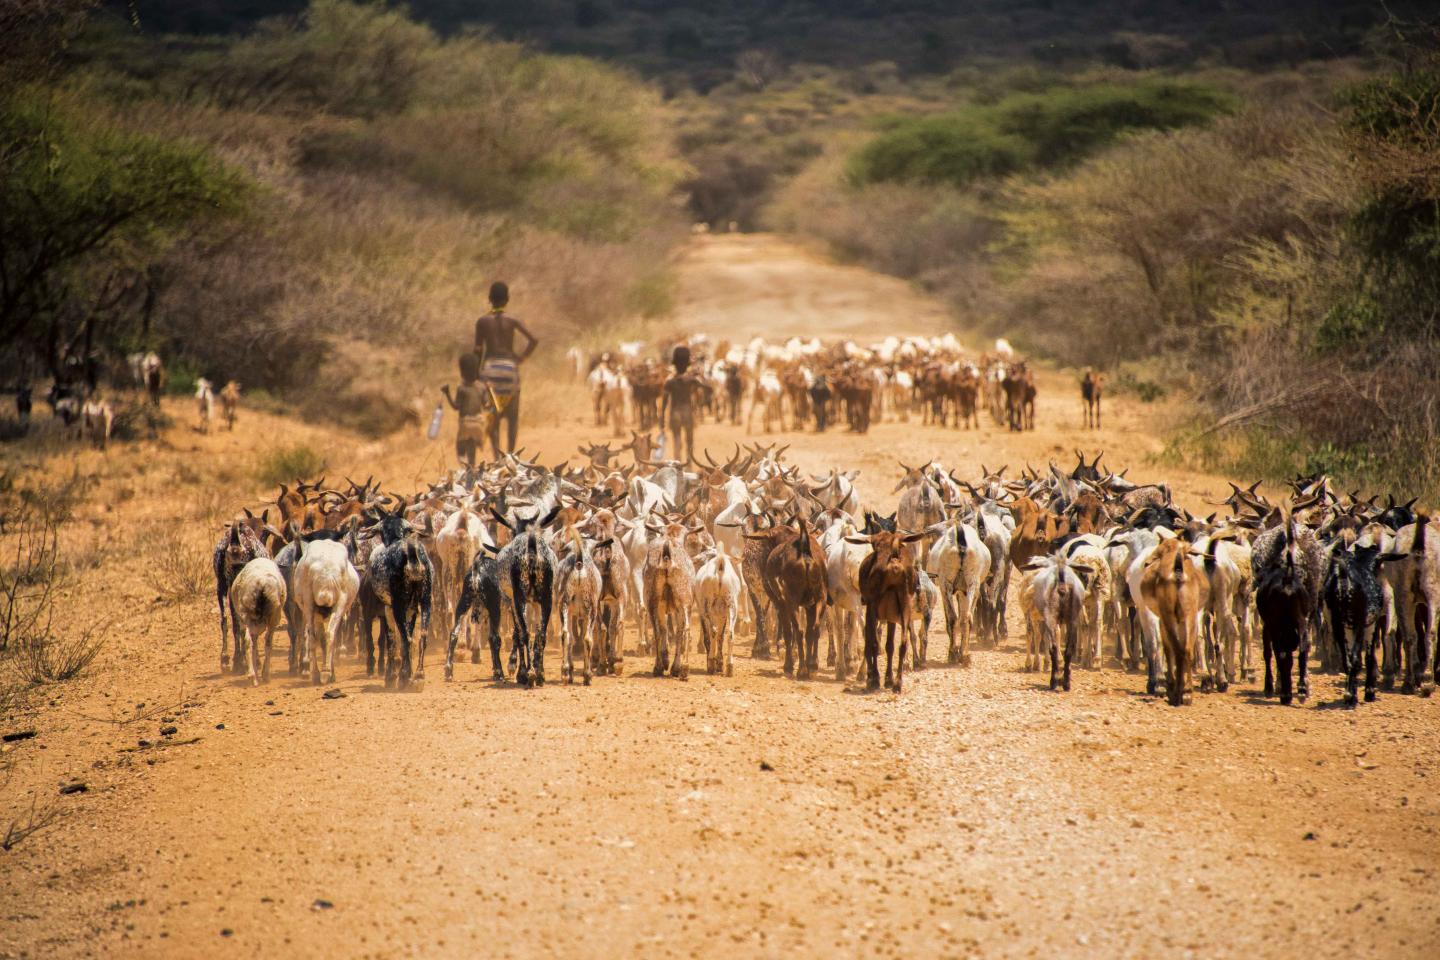 Goats with herder in Ethiopia